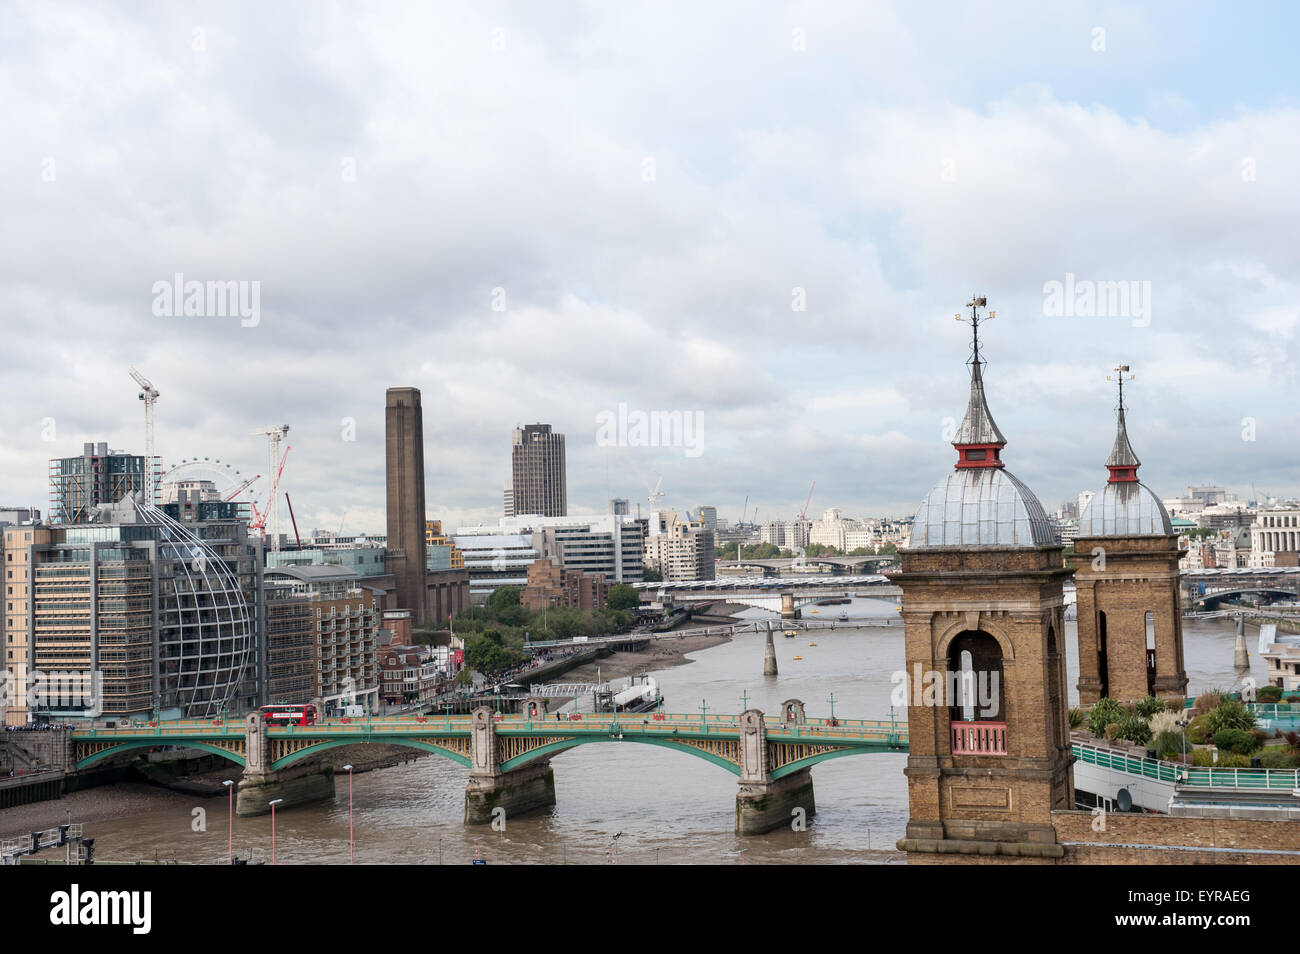 Southwark bridge, London, England. High view of River Thames with modern buildings and old towers, green and yellow Southwark Brdge Stock Photo